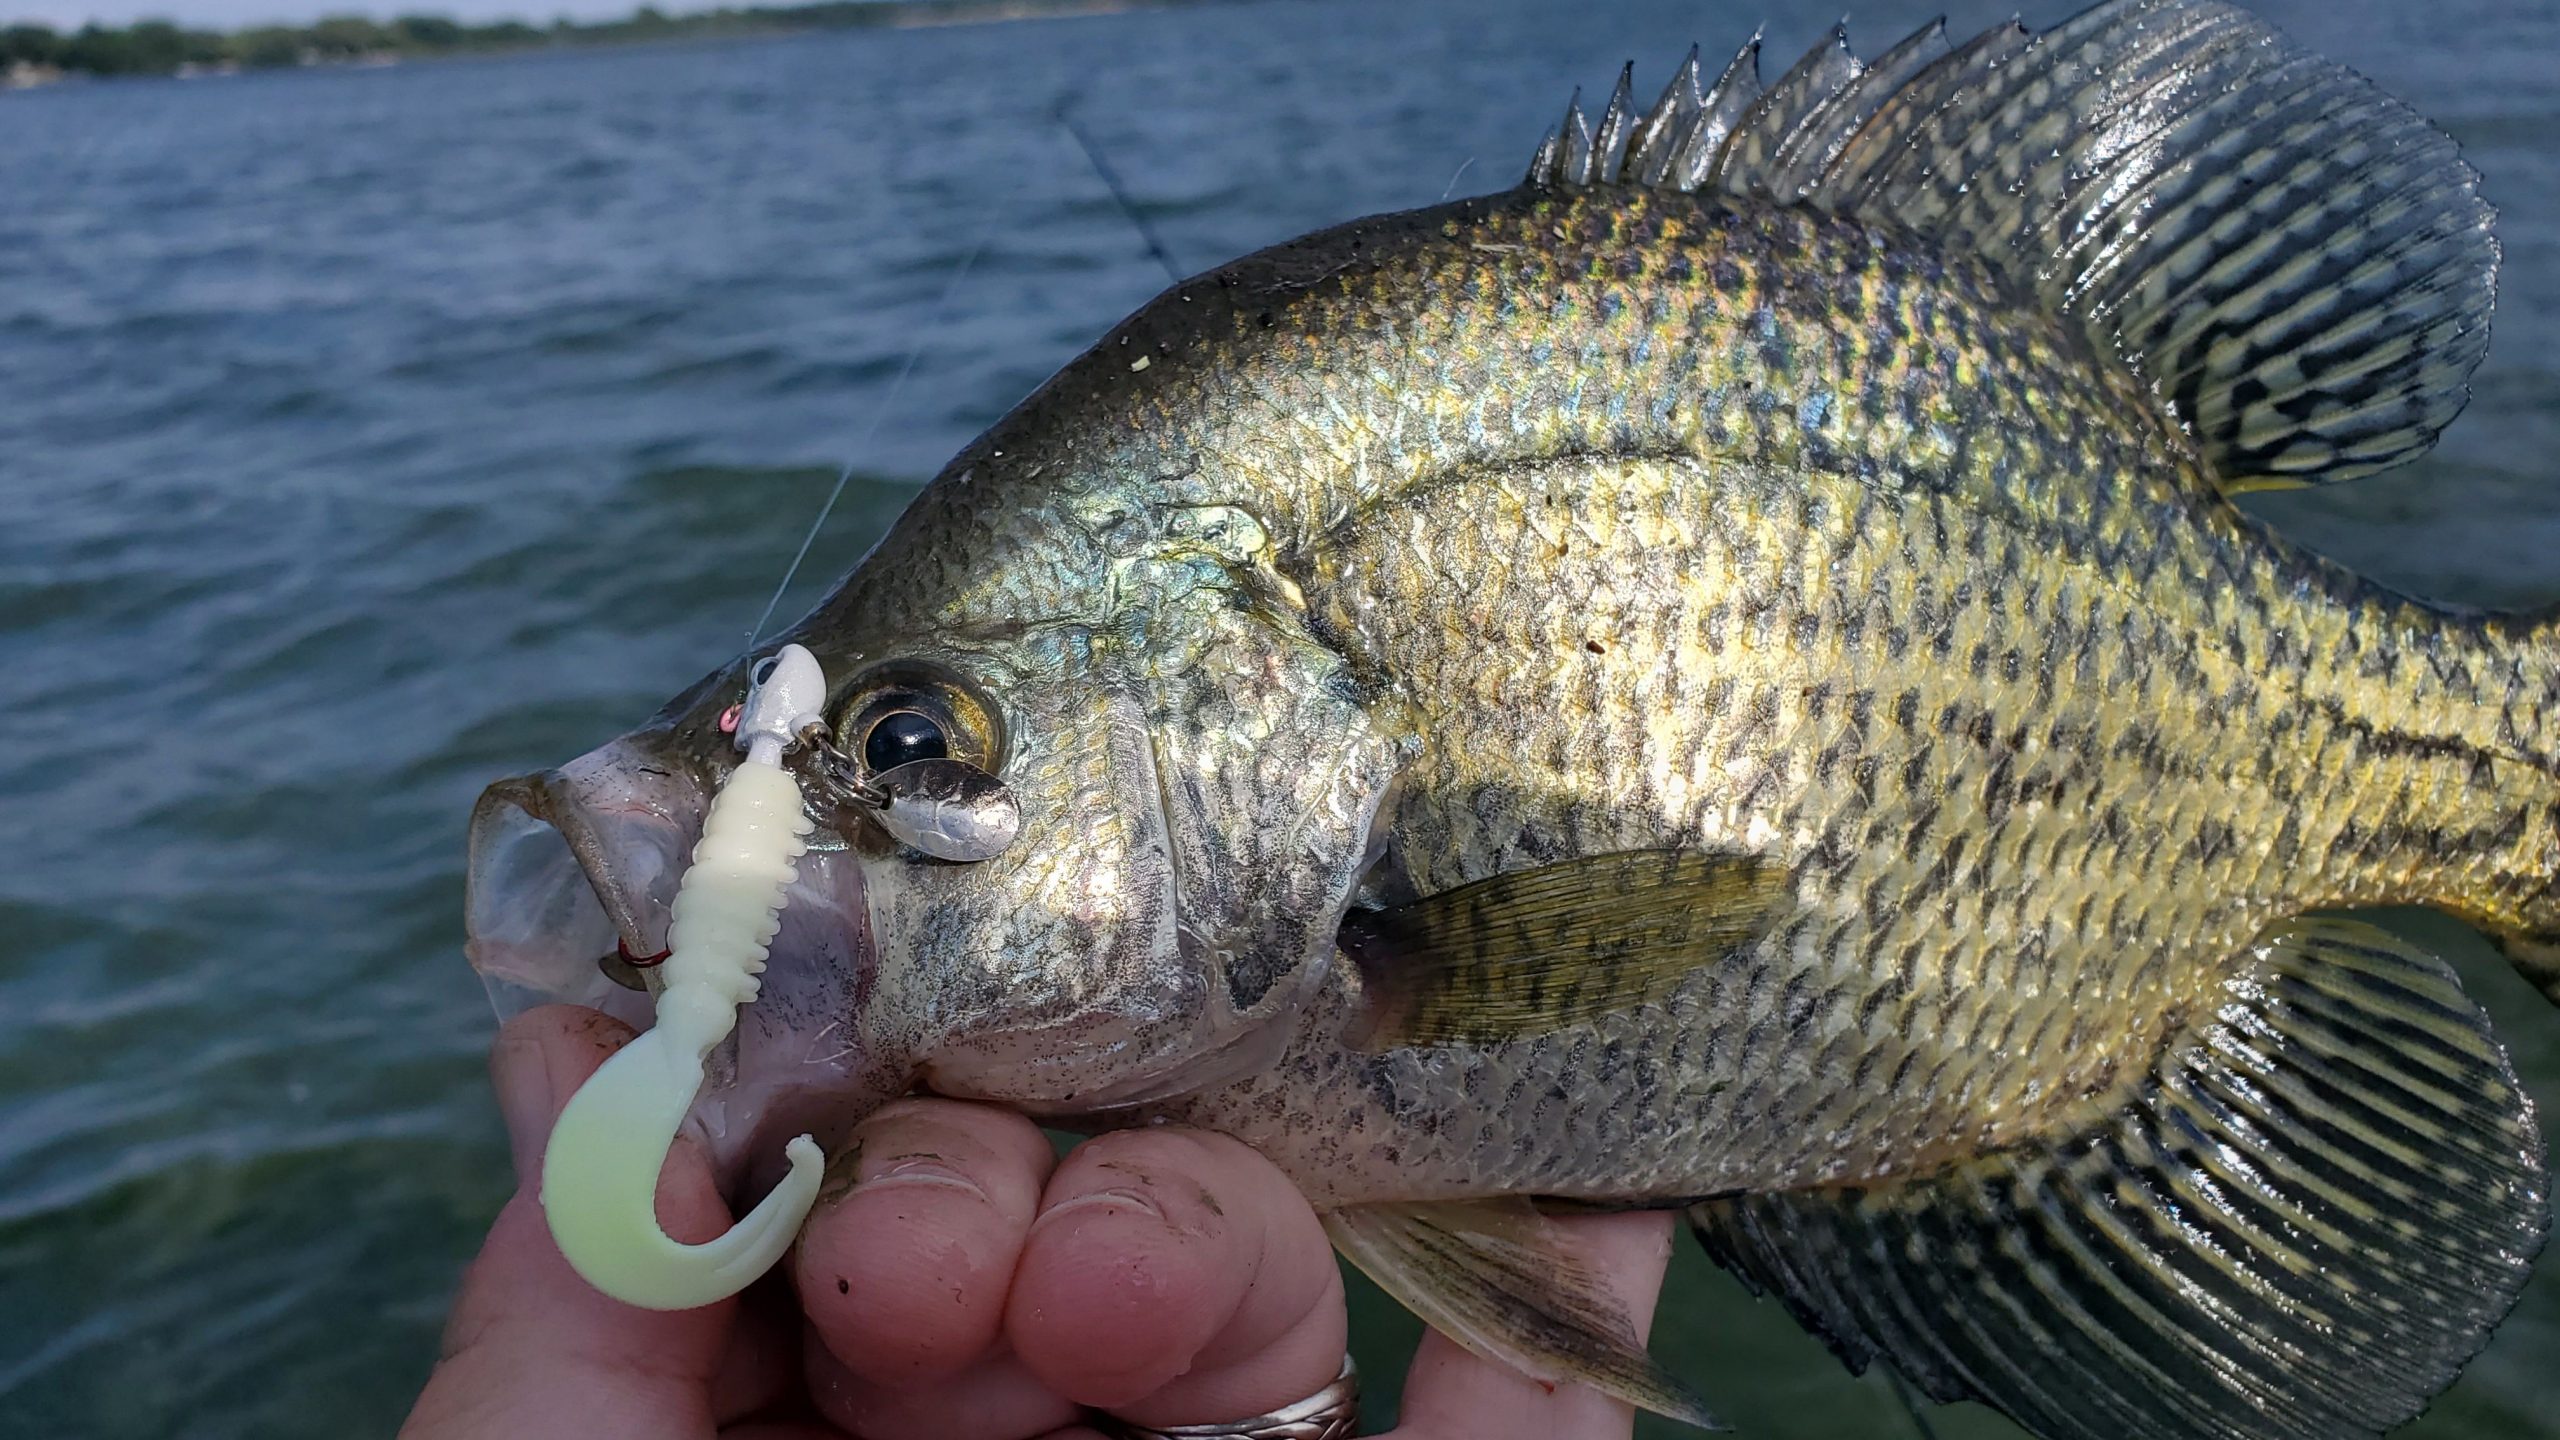 What is this lure? Will crappie bite this and what fish does this